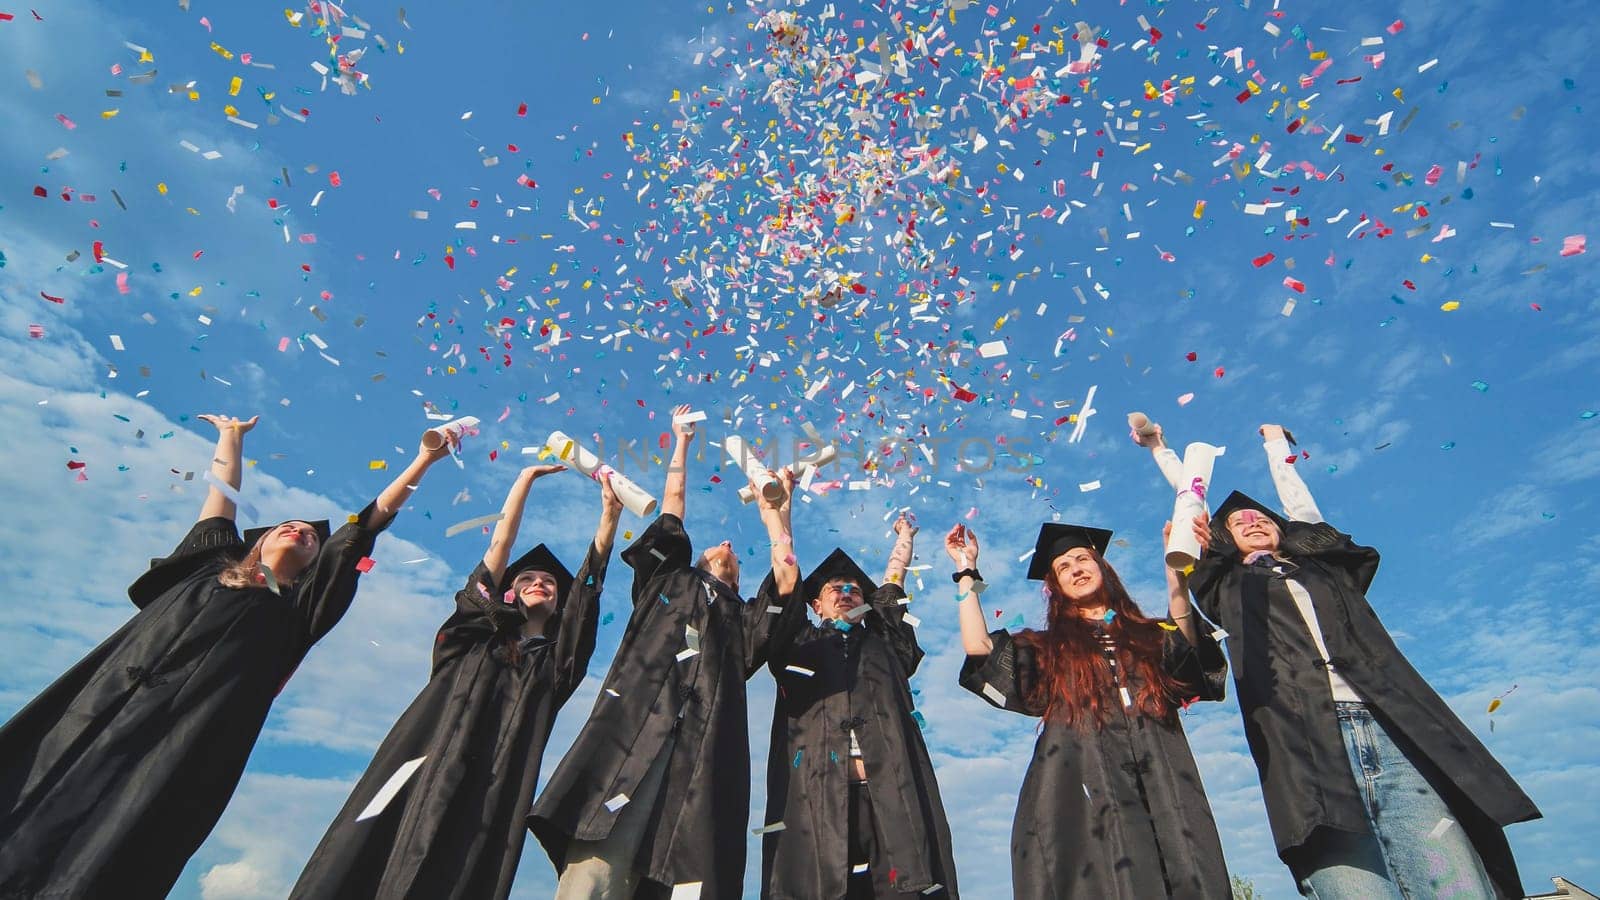 Graduates throw colorful confetti against a blue sky. by DovidPro